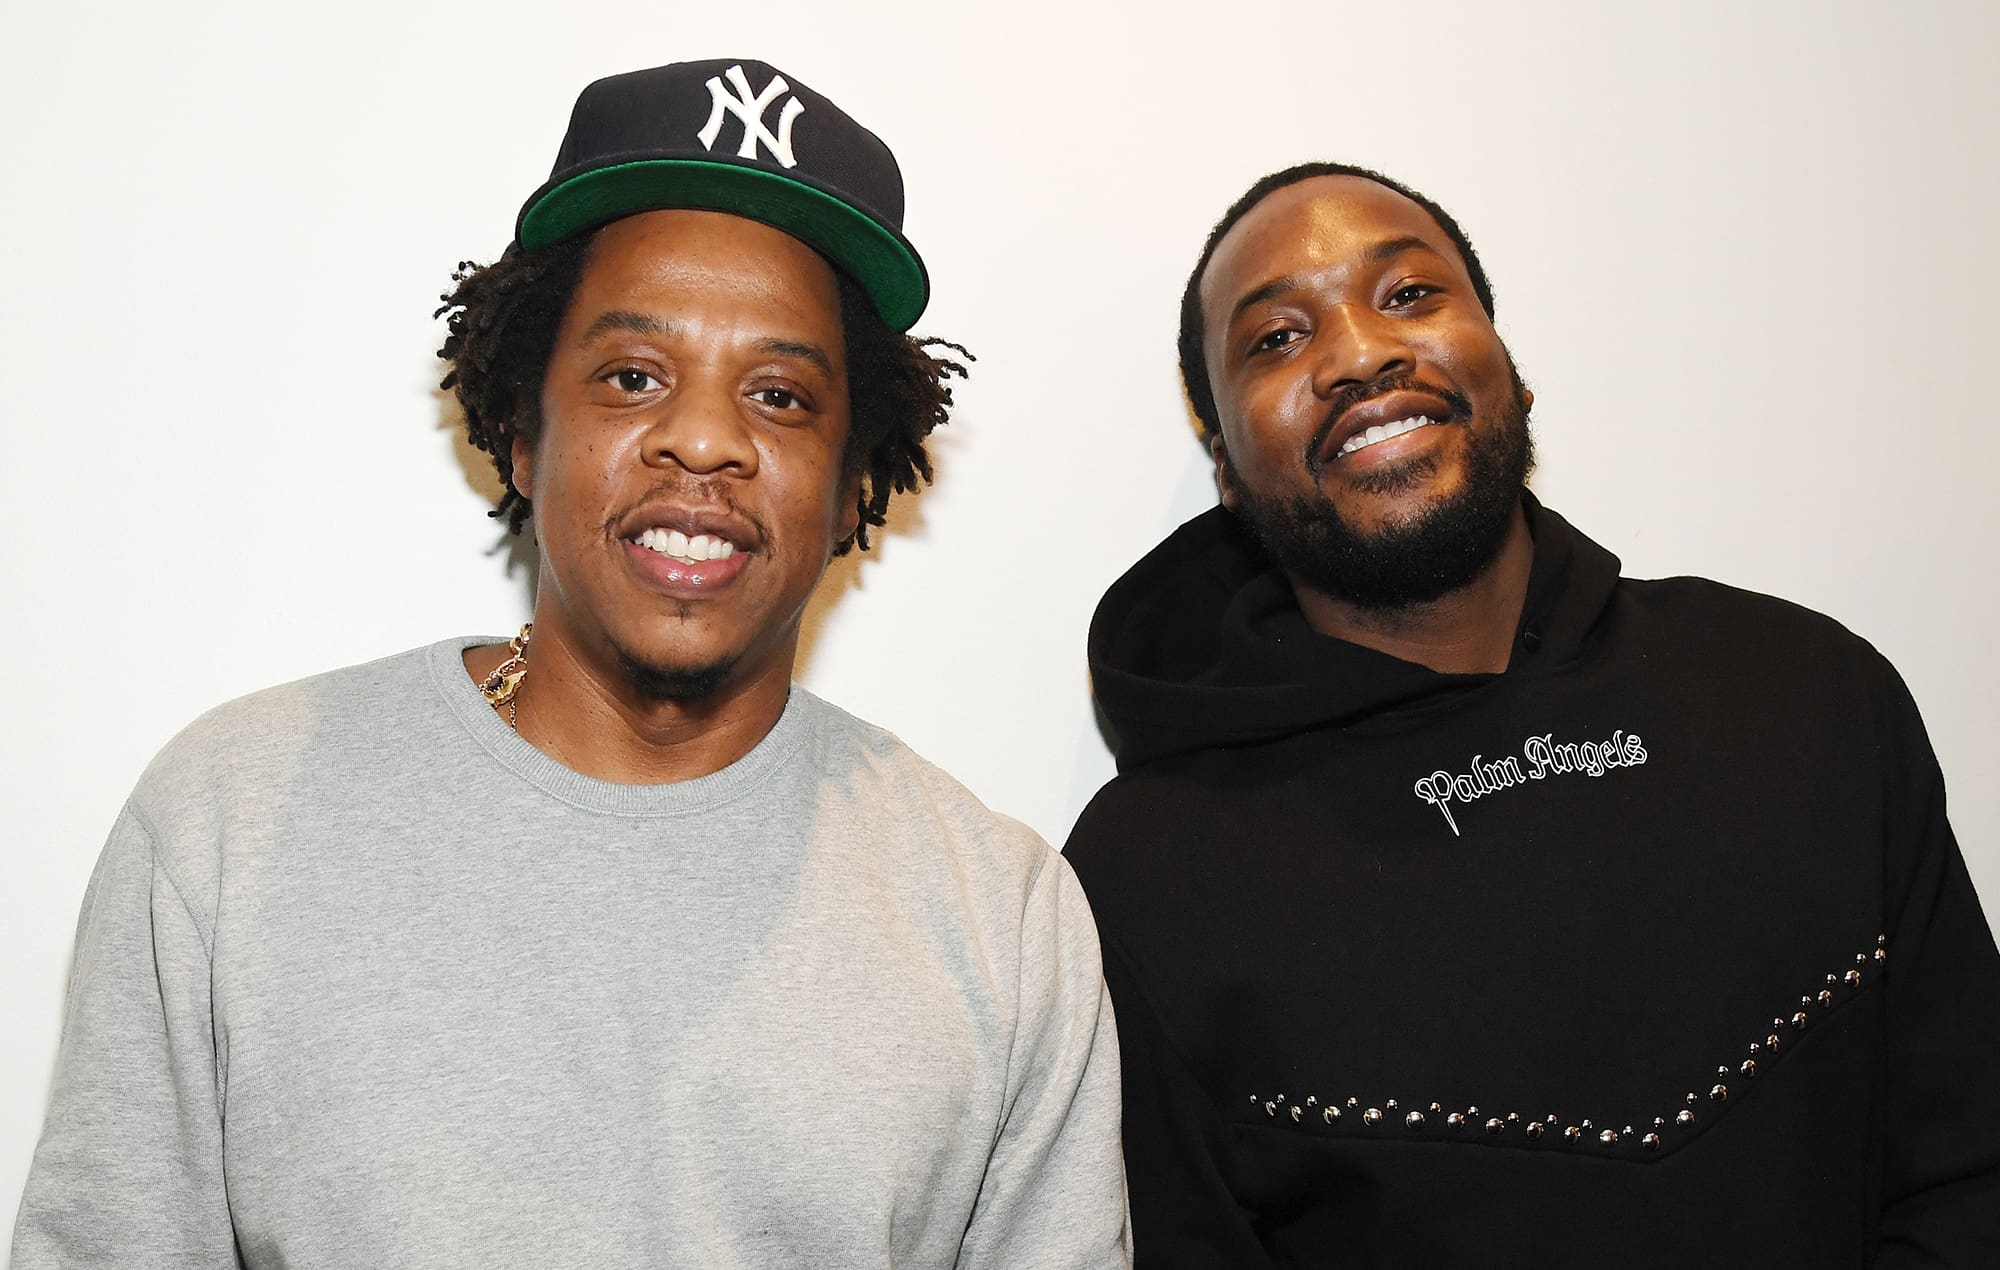 Meek Mill Reveals Joint Record Label Venture With Jay-Z Following Prison Reform Fight Together